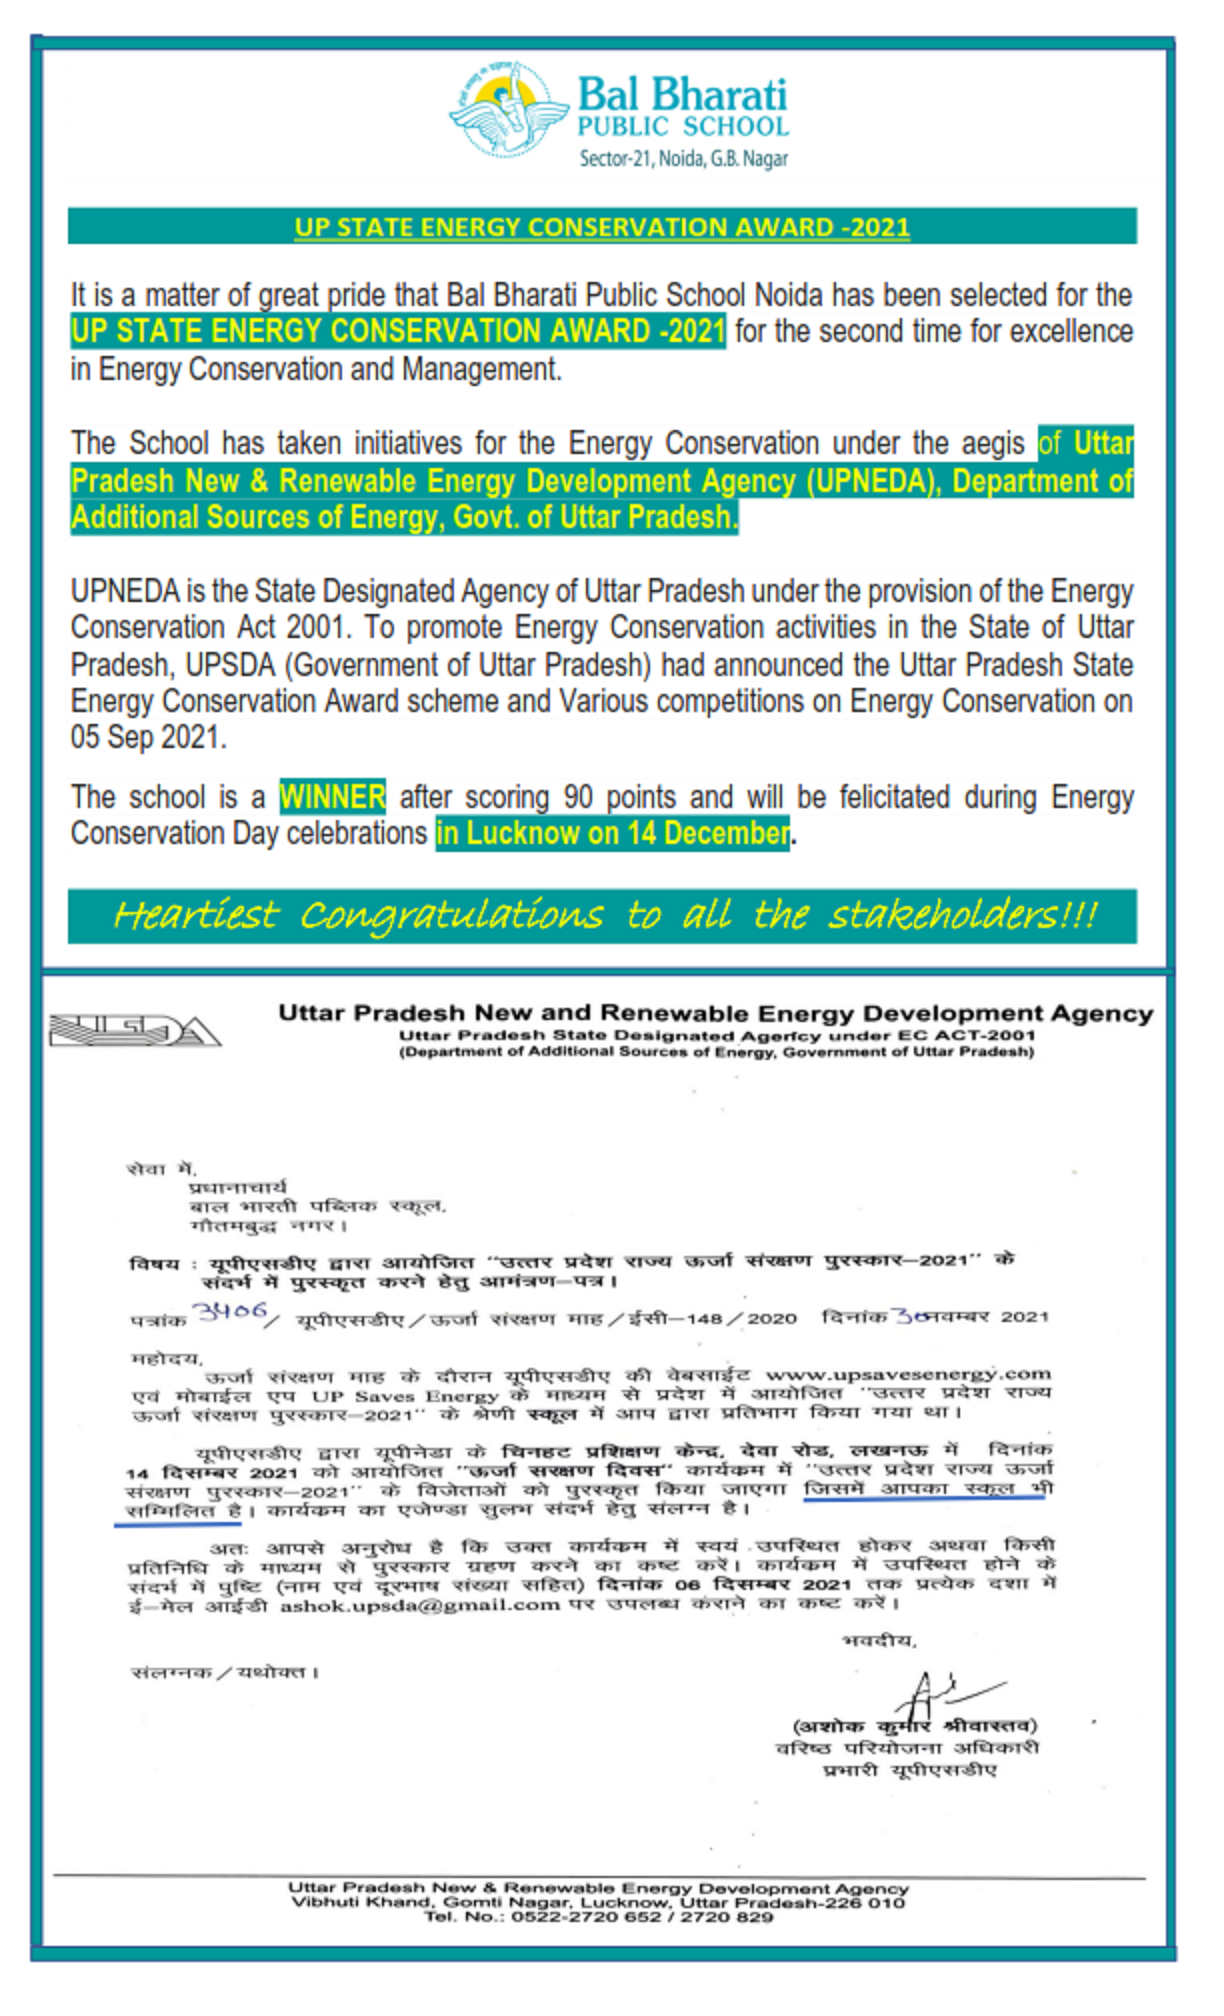 UP State Energy Conservation Award 2021